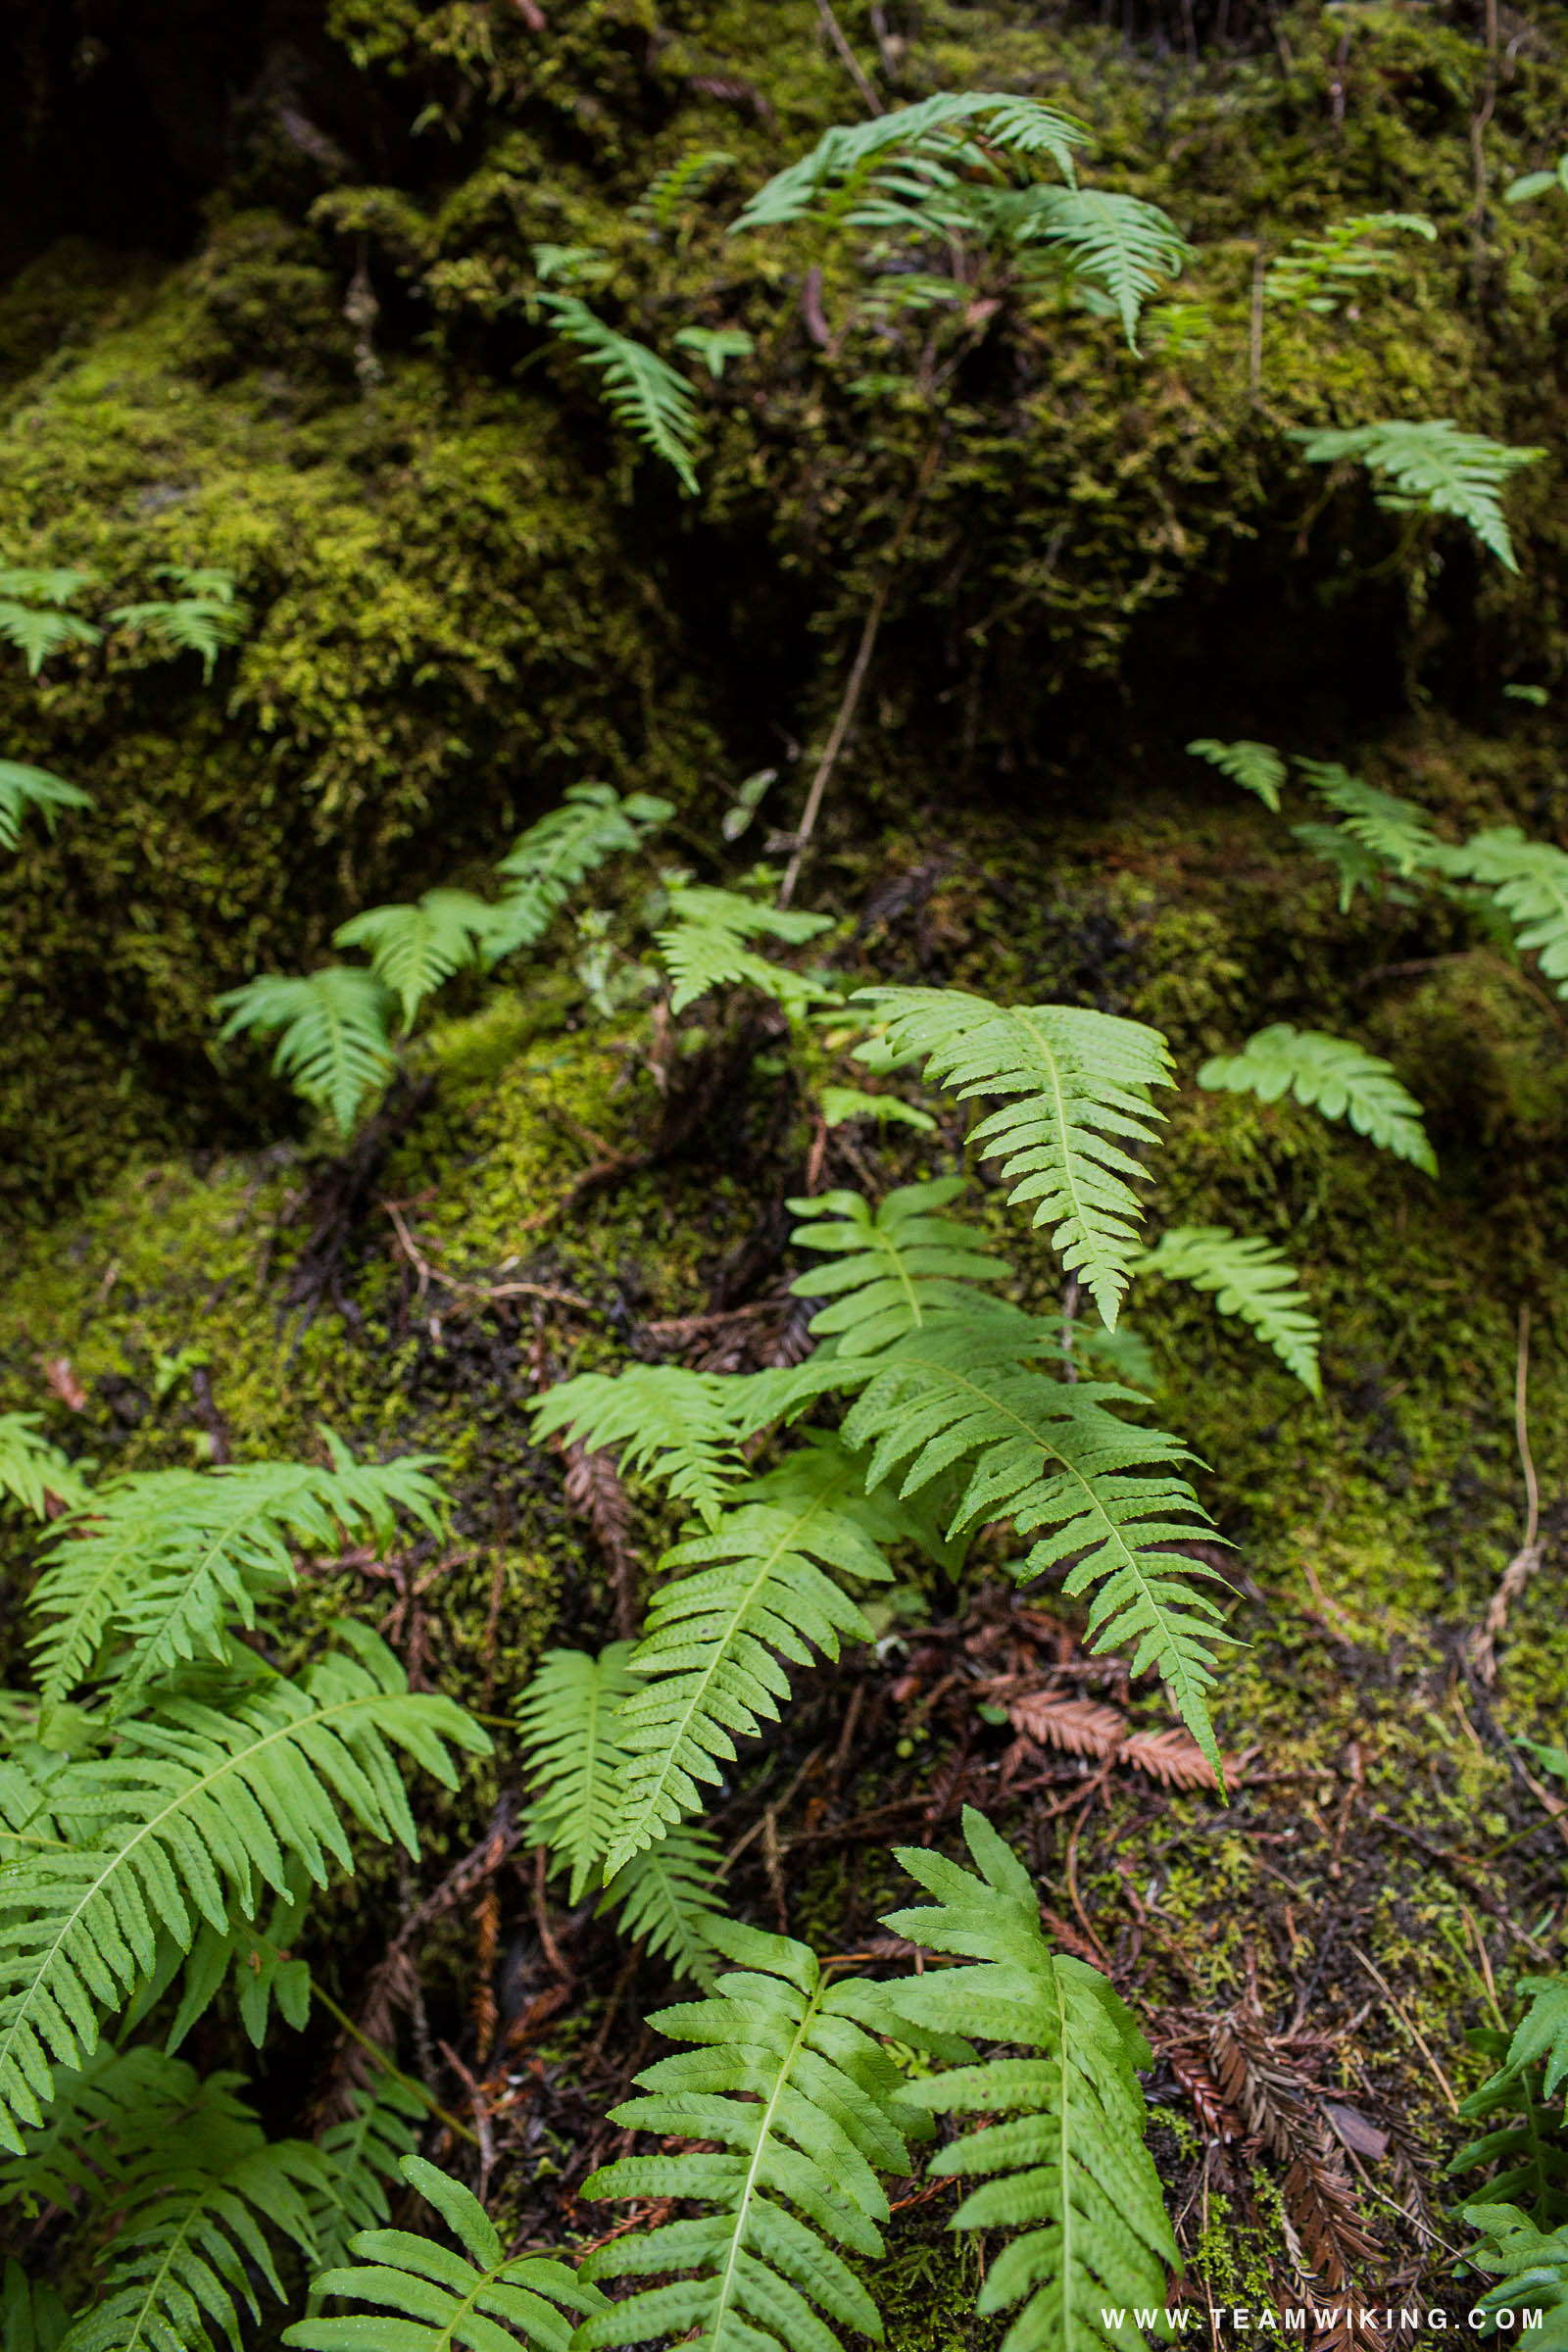 Fern Canyon Trail at Van Damme State Park near Mendocino, California